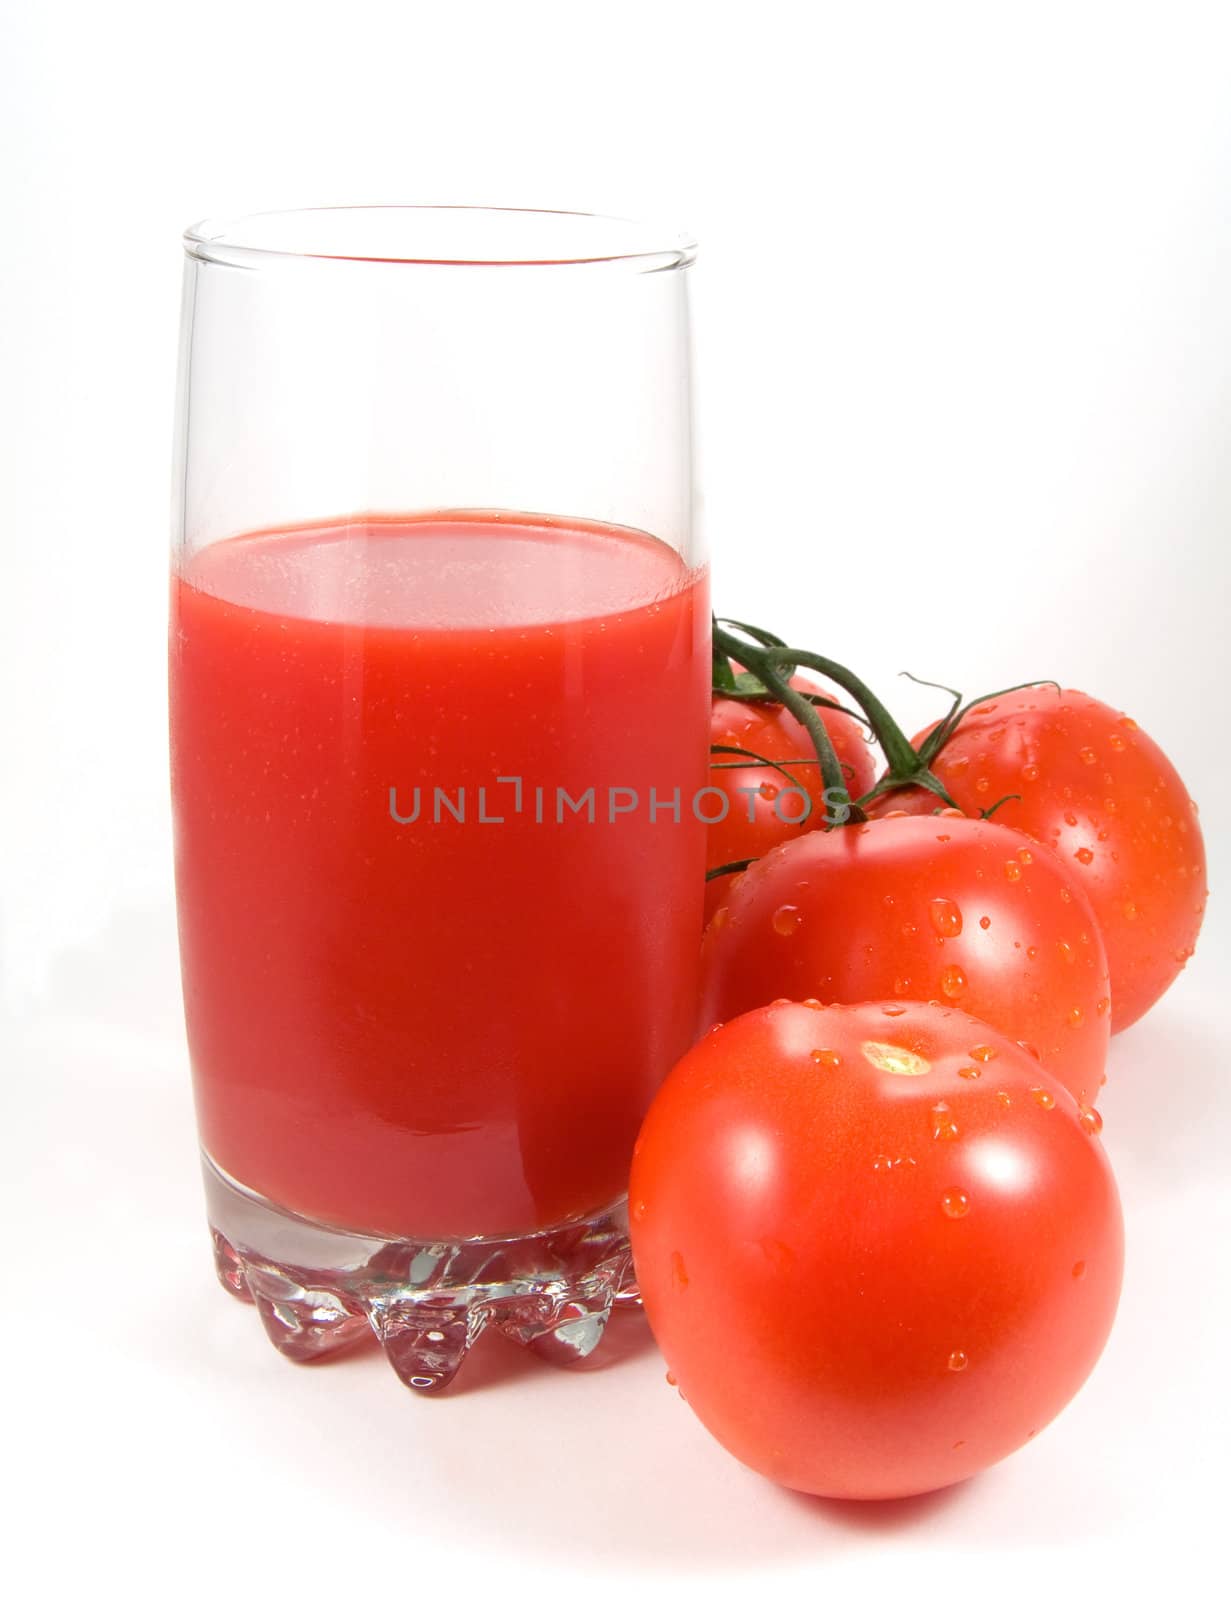 Tomatoes and glass of juice by serpl